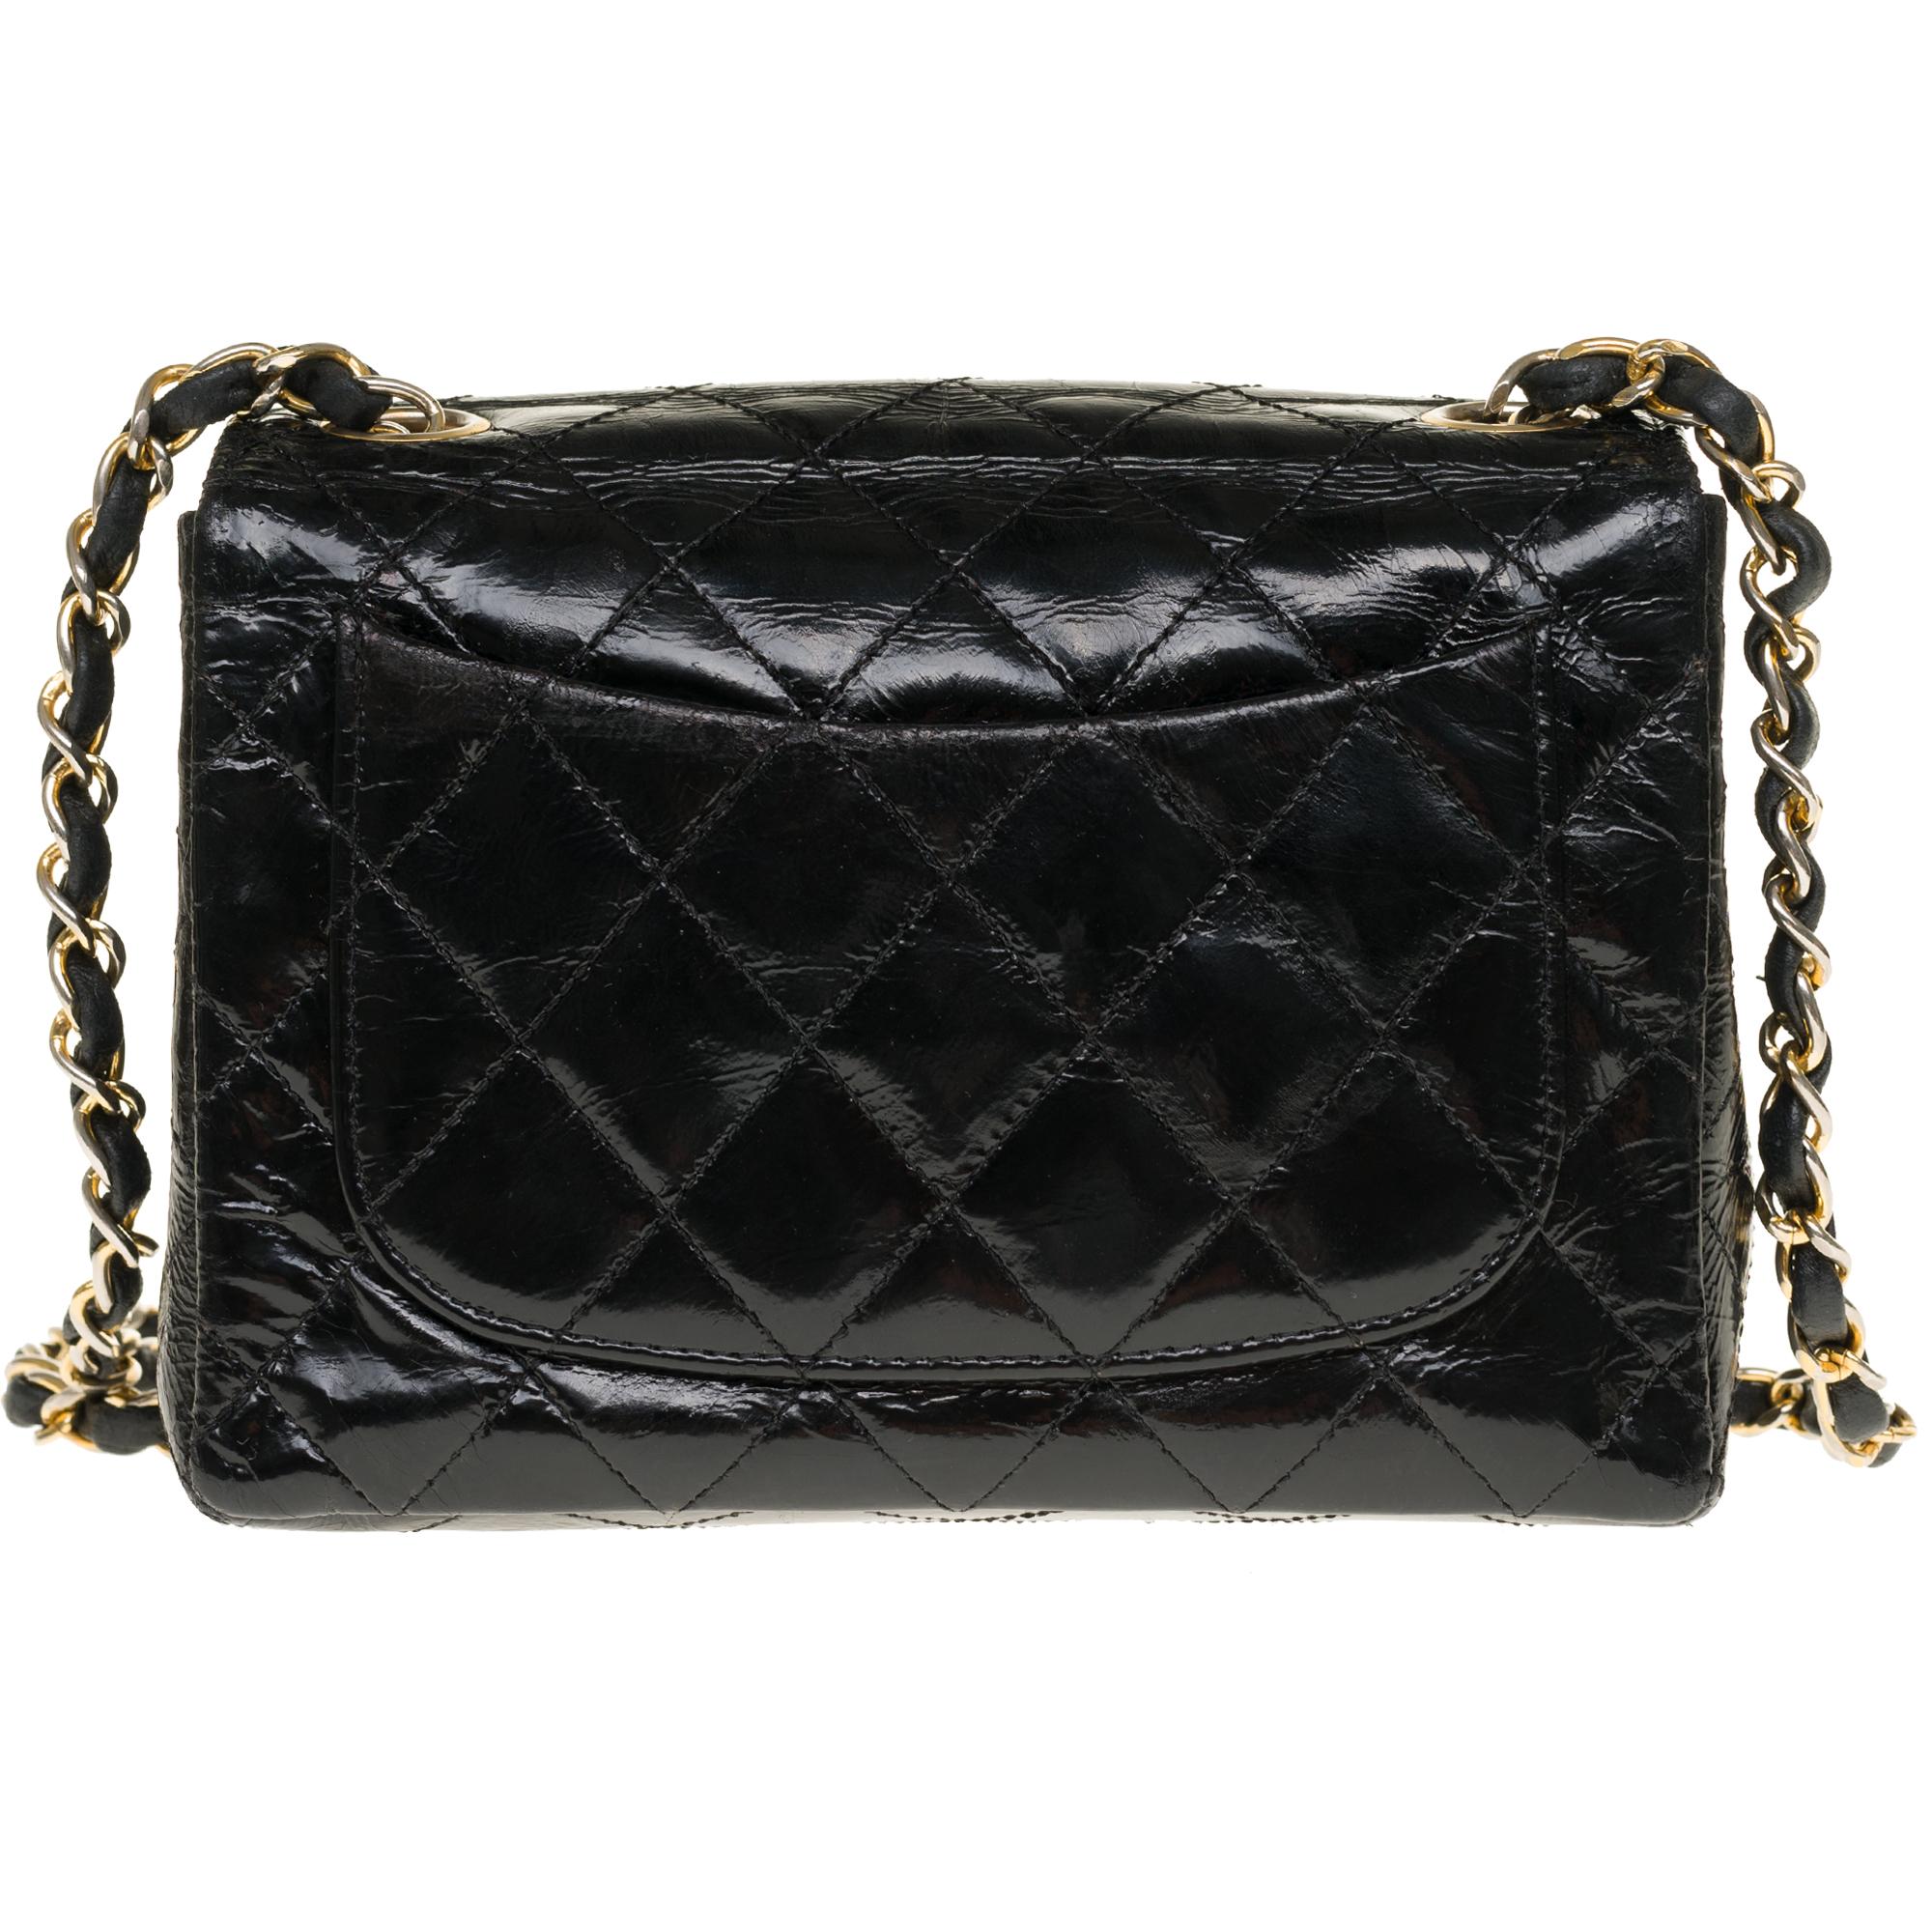 Gorgeous and highly sought-after Chanel Mini Timeless bag in black quilted patent leather, gold-tone metal shoulder strap handle intertwined with black patent leather.
Closure by flap and closure by tourniquet in gold metal.
Inside in burgundy